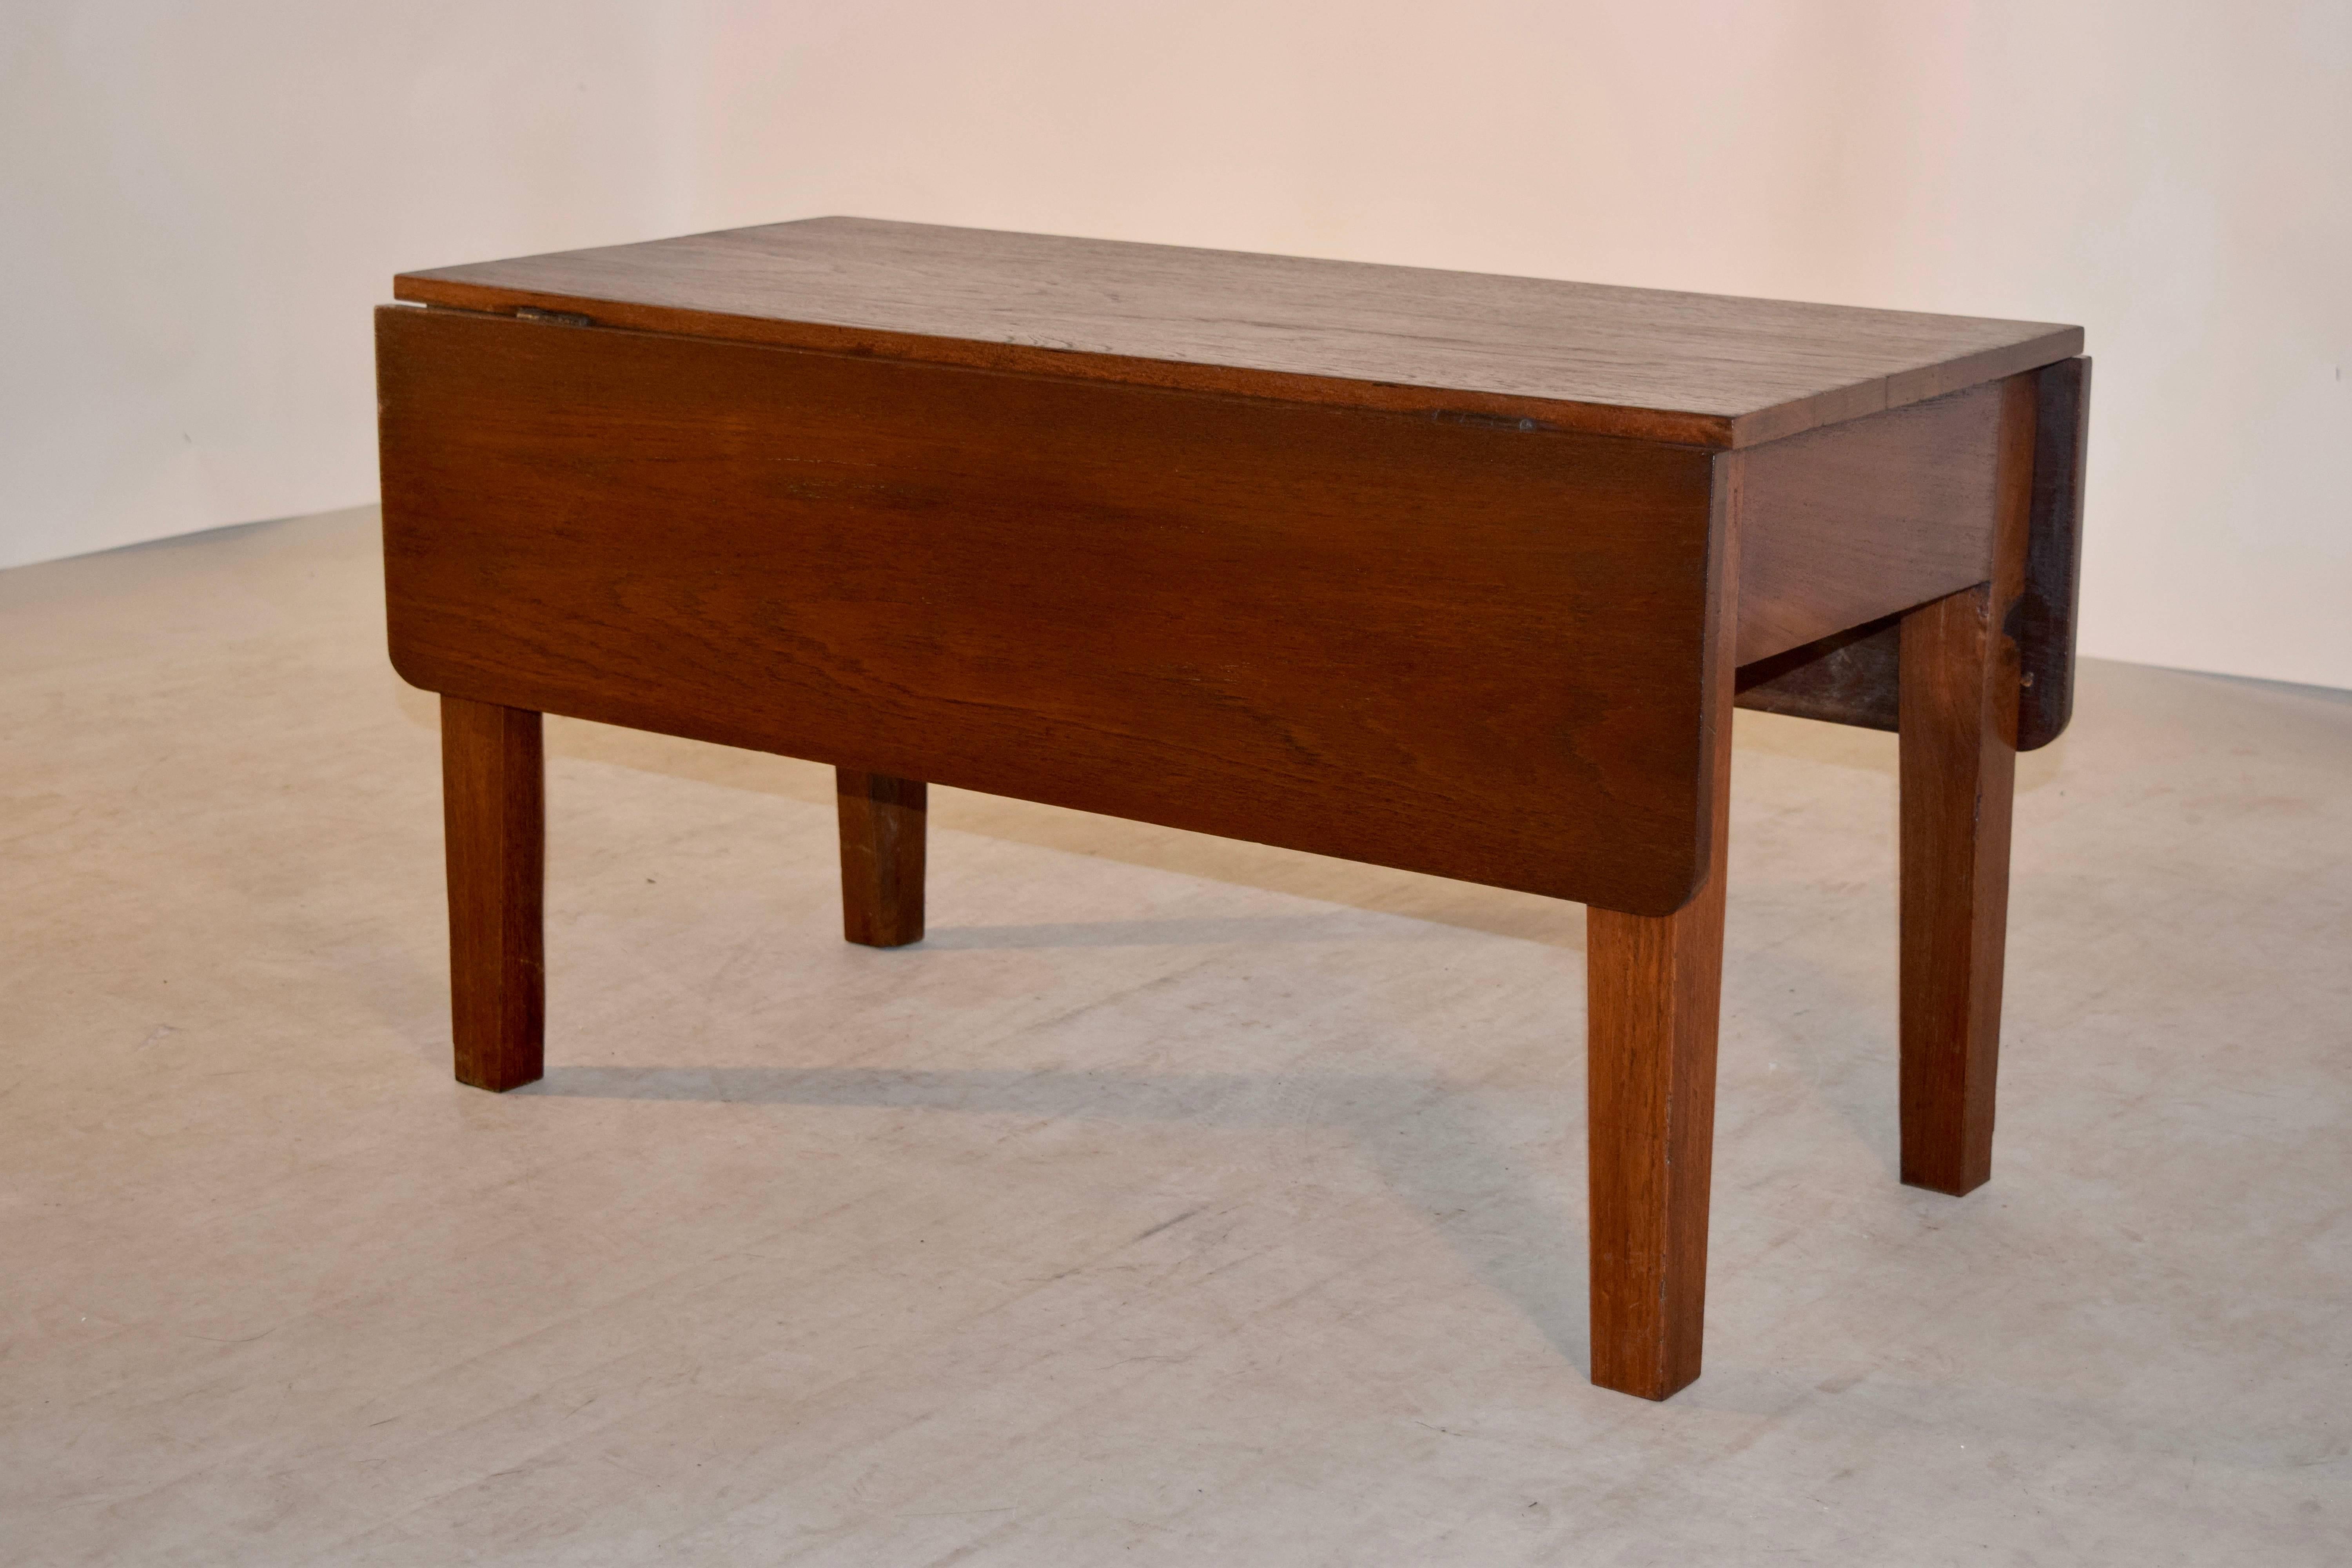 19th Century English coffee table with drop leaves made from Chestnut. It has a single drawer on one end, and is supported on tapered legs. The top open measures 35.75 x 34.75.